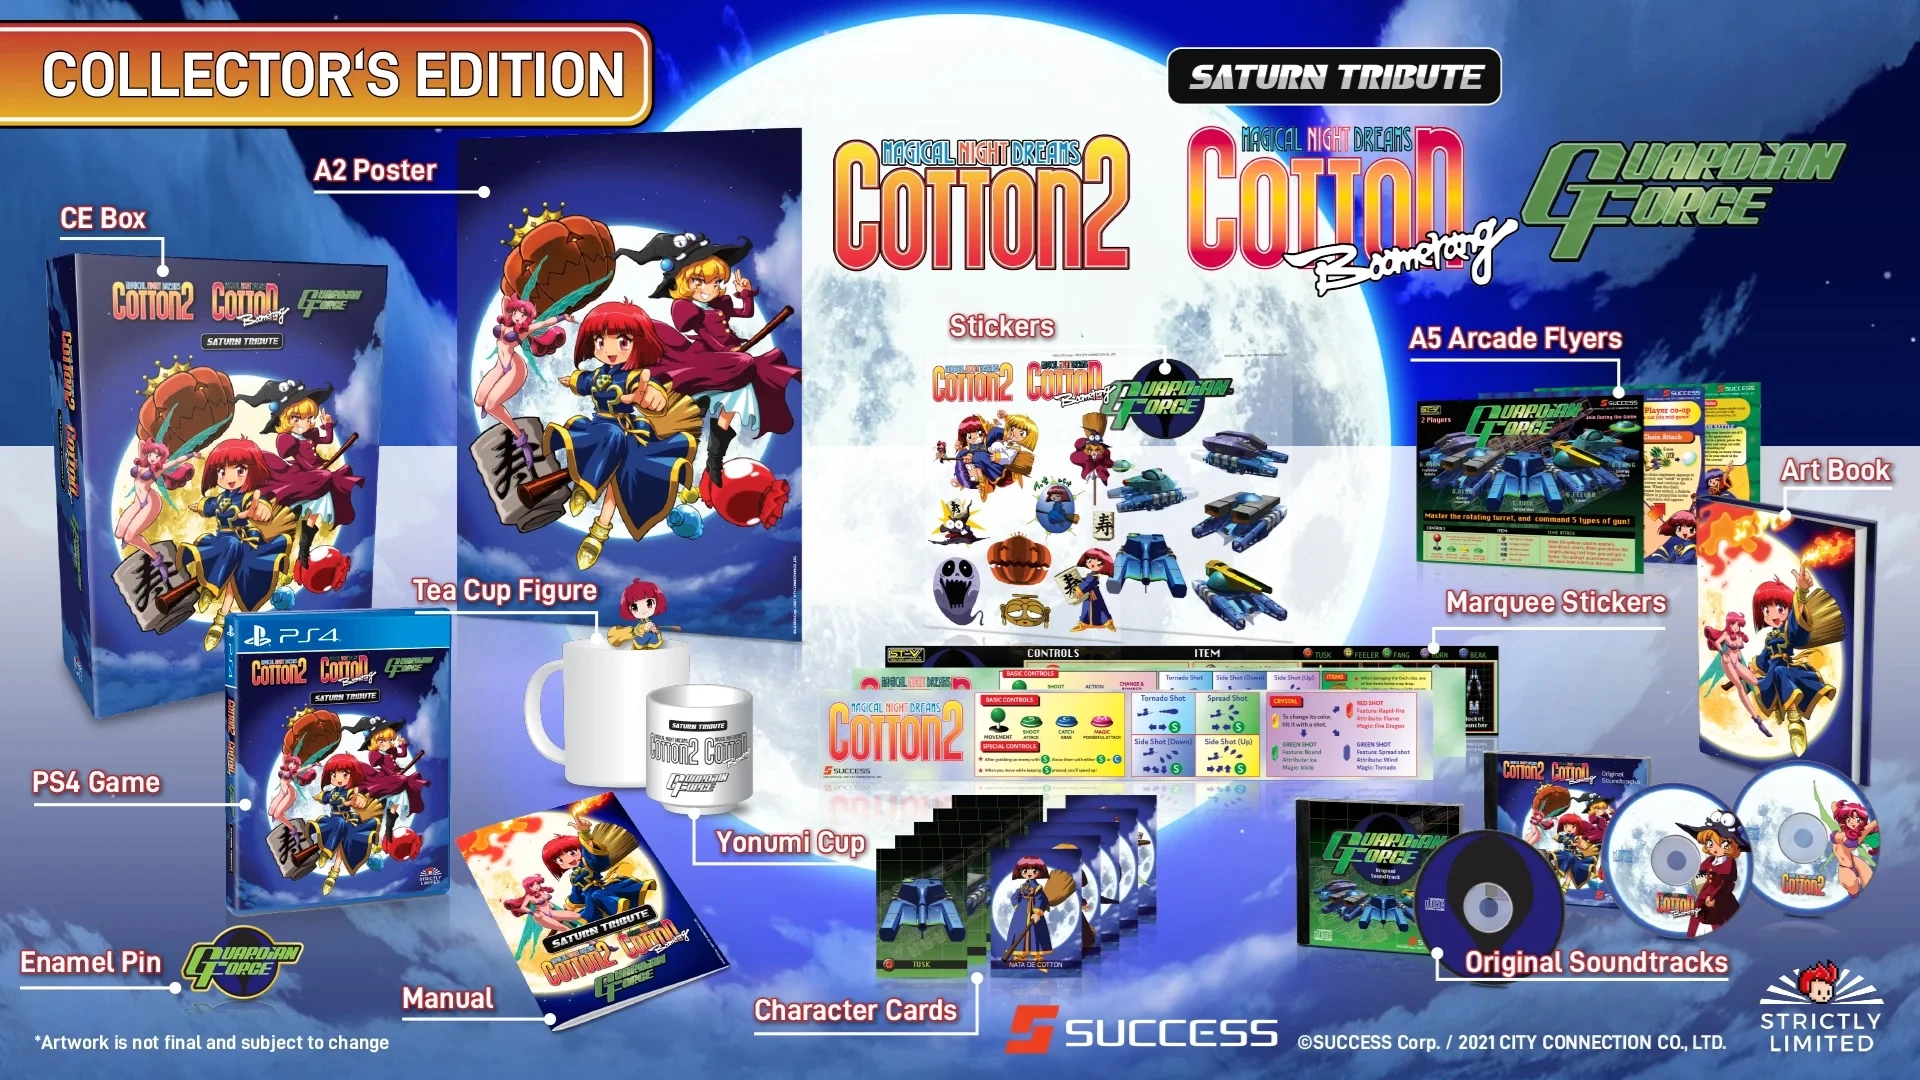 Cotton Guardian Force Saturn Tribute - Collector's Edition (Strictly Limited) (PS4), ININ Games, Strictly Limited Gamed